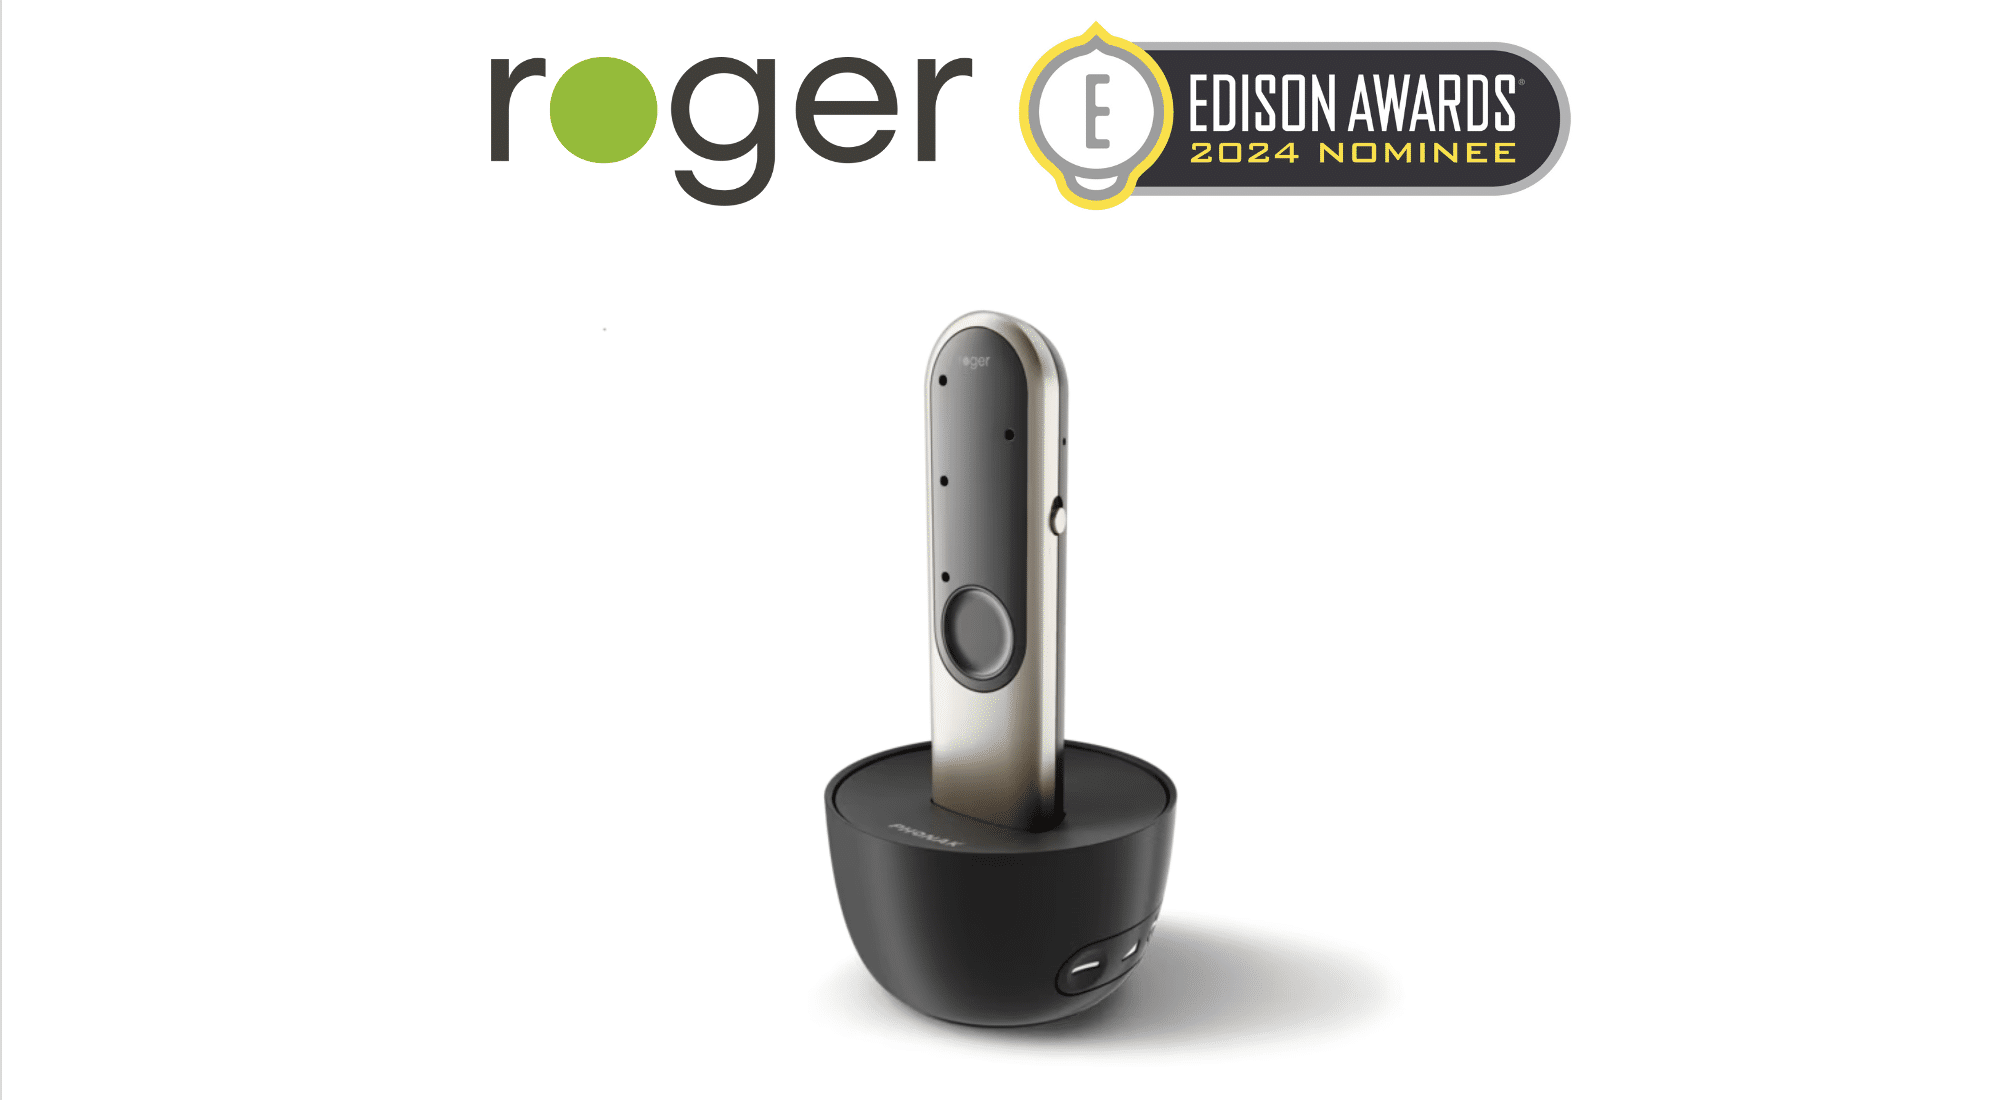 Phonak’s Roger On™ microphone wins the 2024 Edison Award